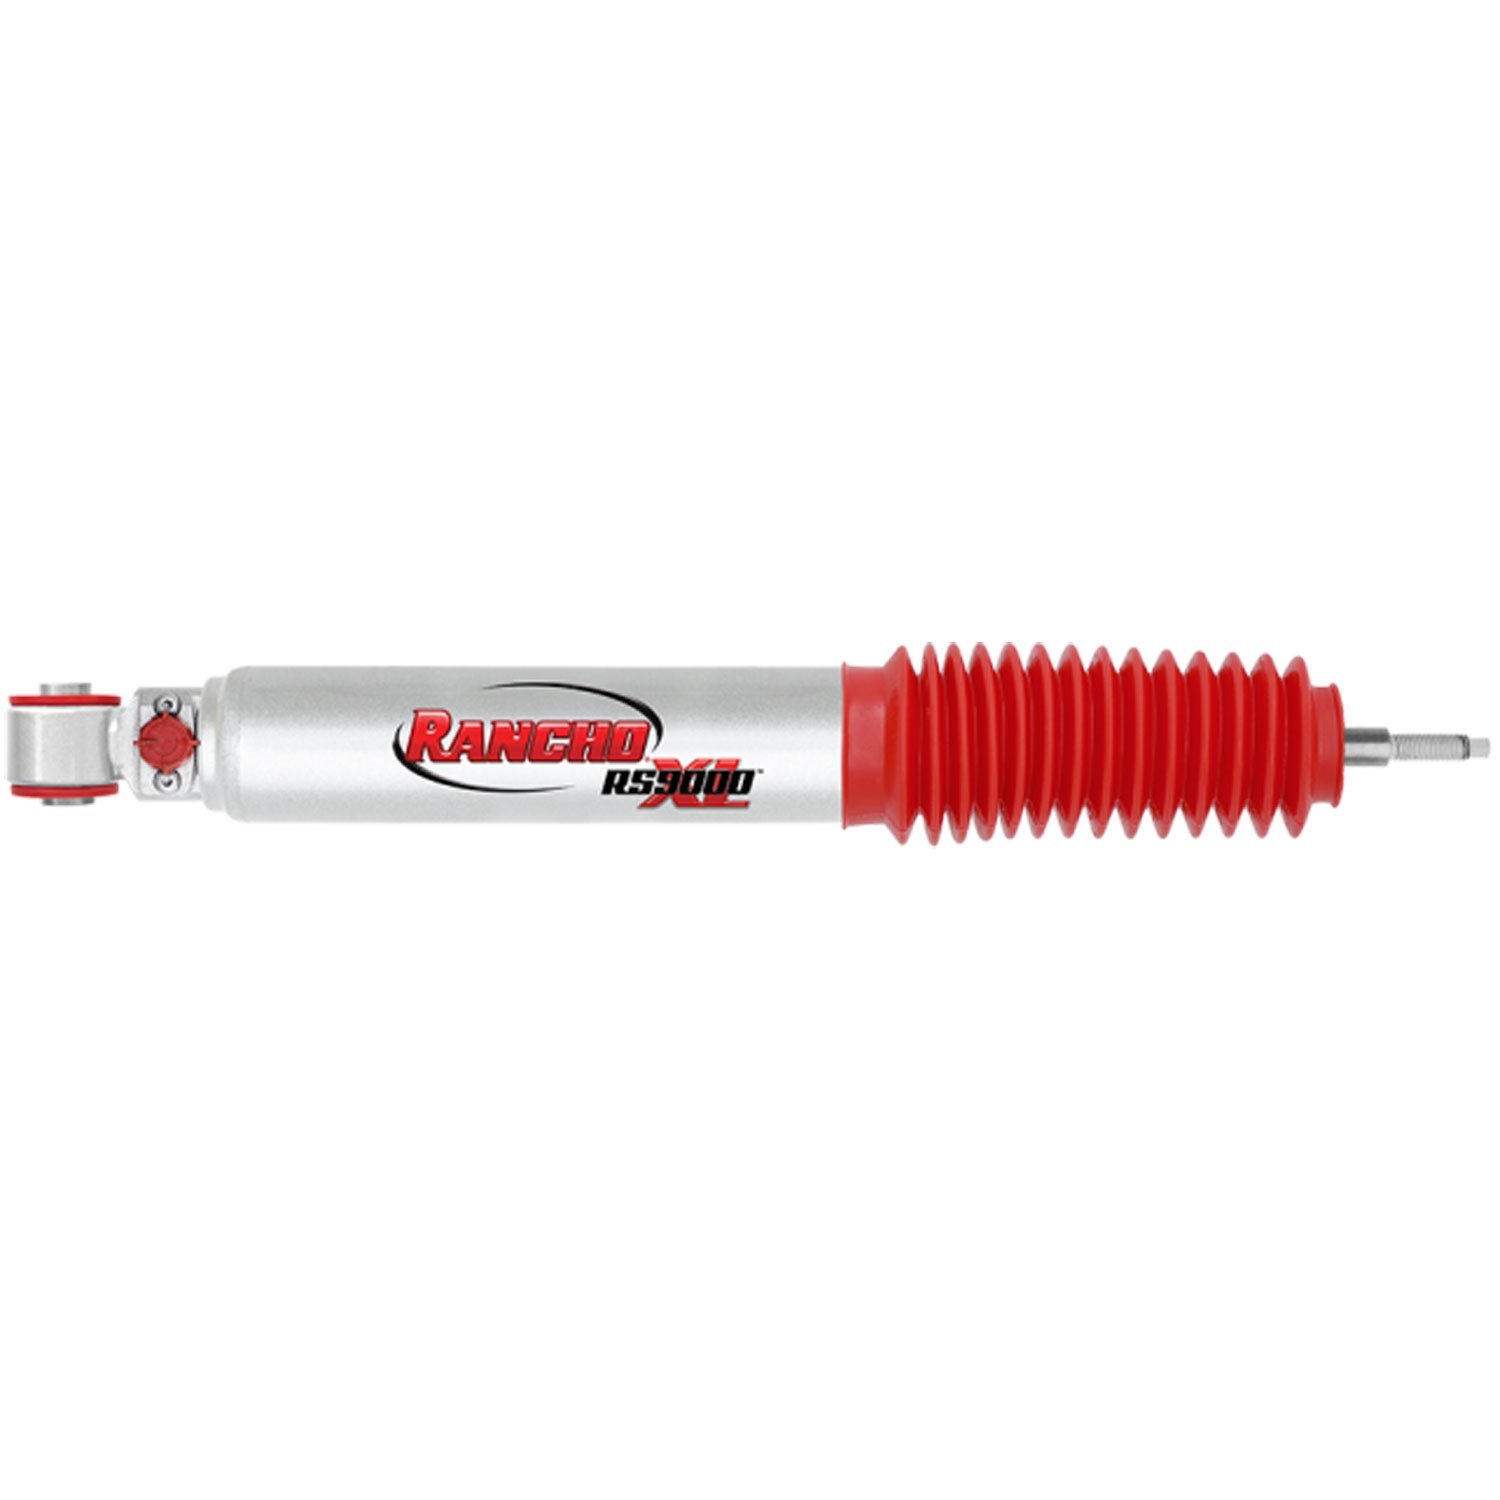 RS9000XL Rear Shock Absorber Fits Ford Expedition, F150 and F250